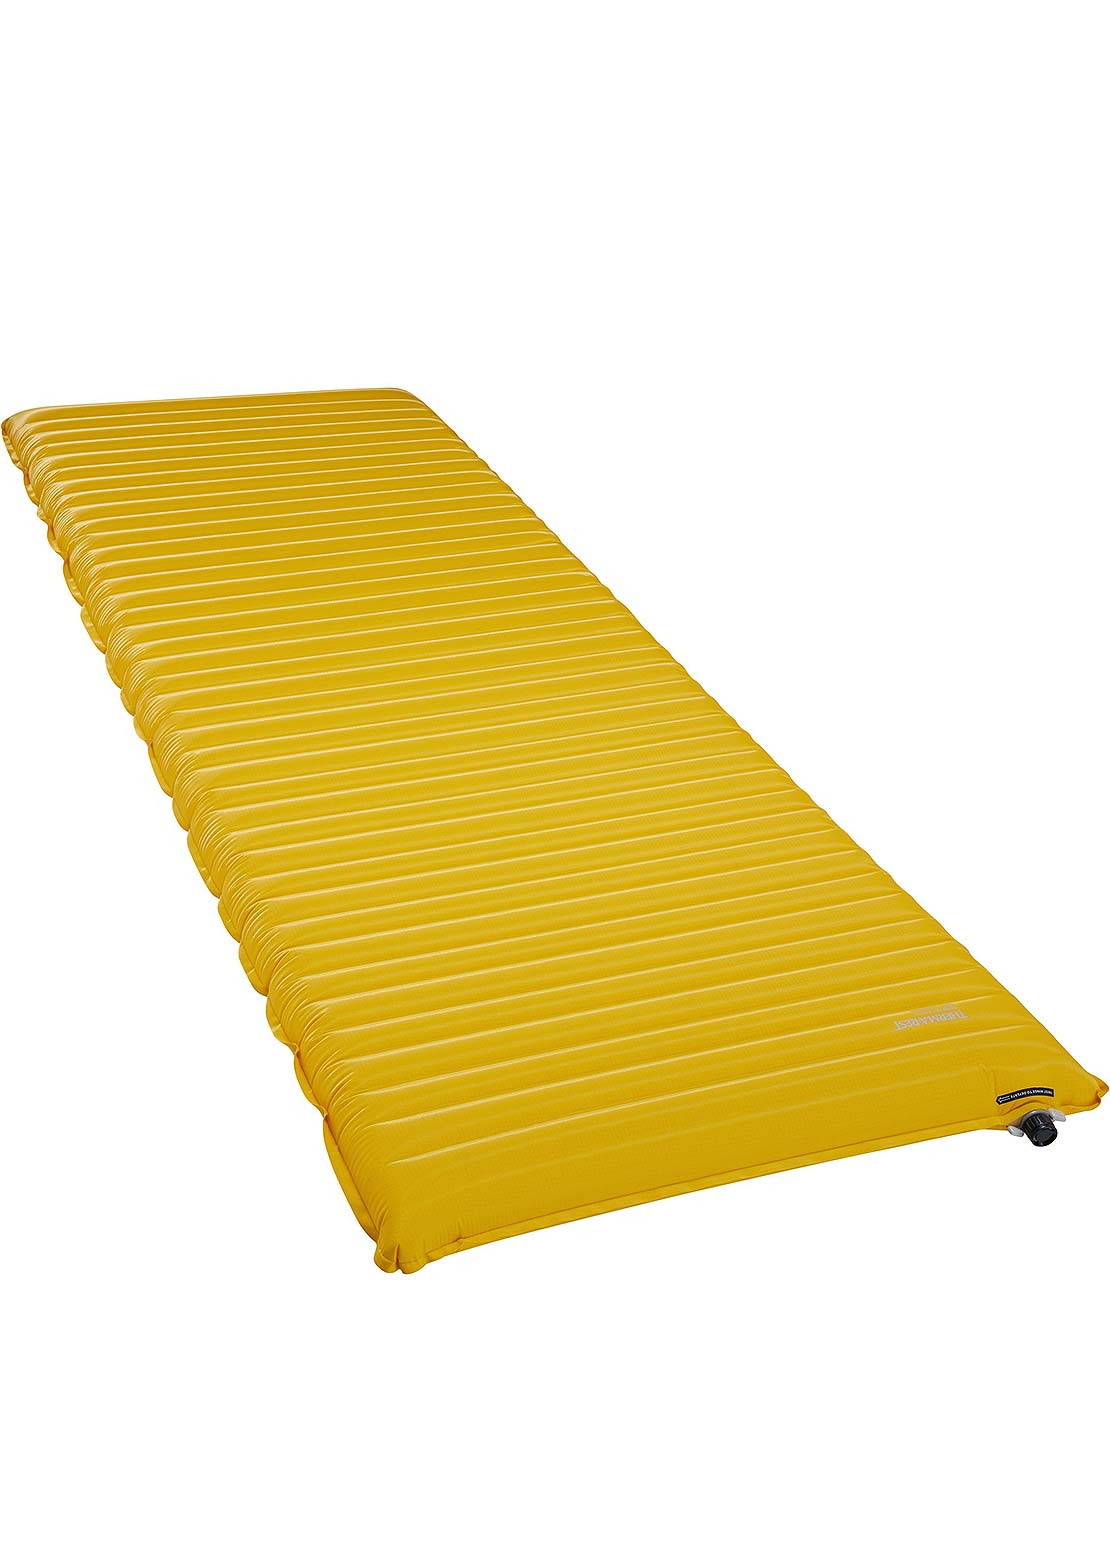 Therm-A-Rest NeoAir Xlite NXT Max Sleeping Pad Solar Flare